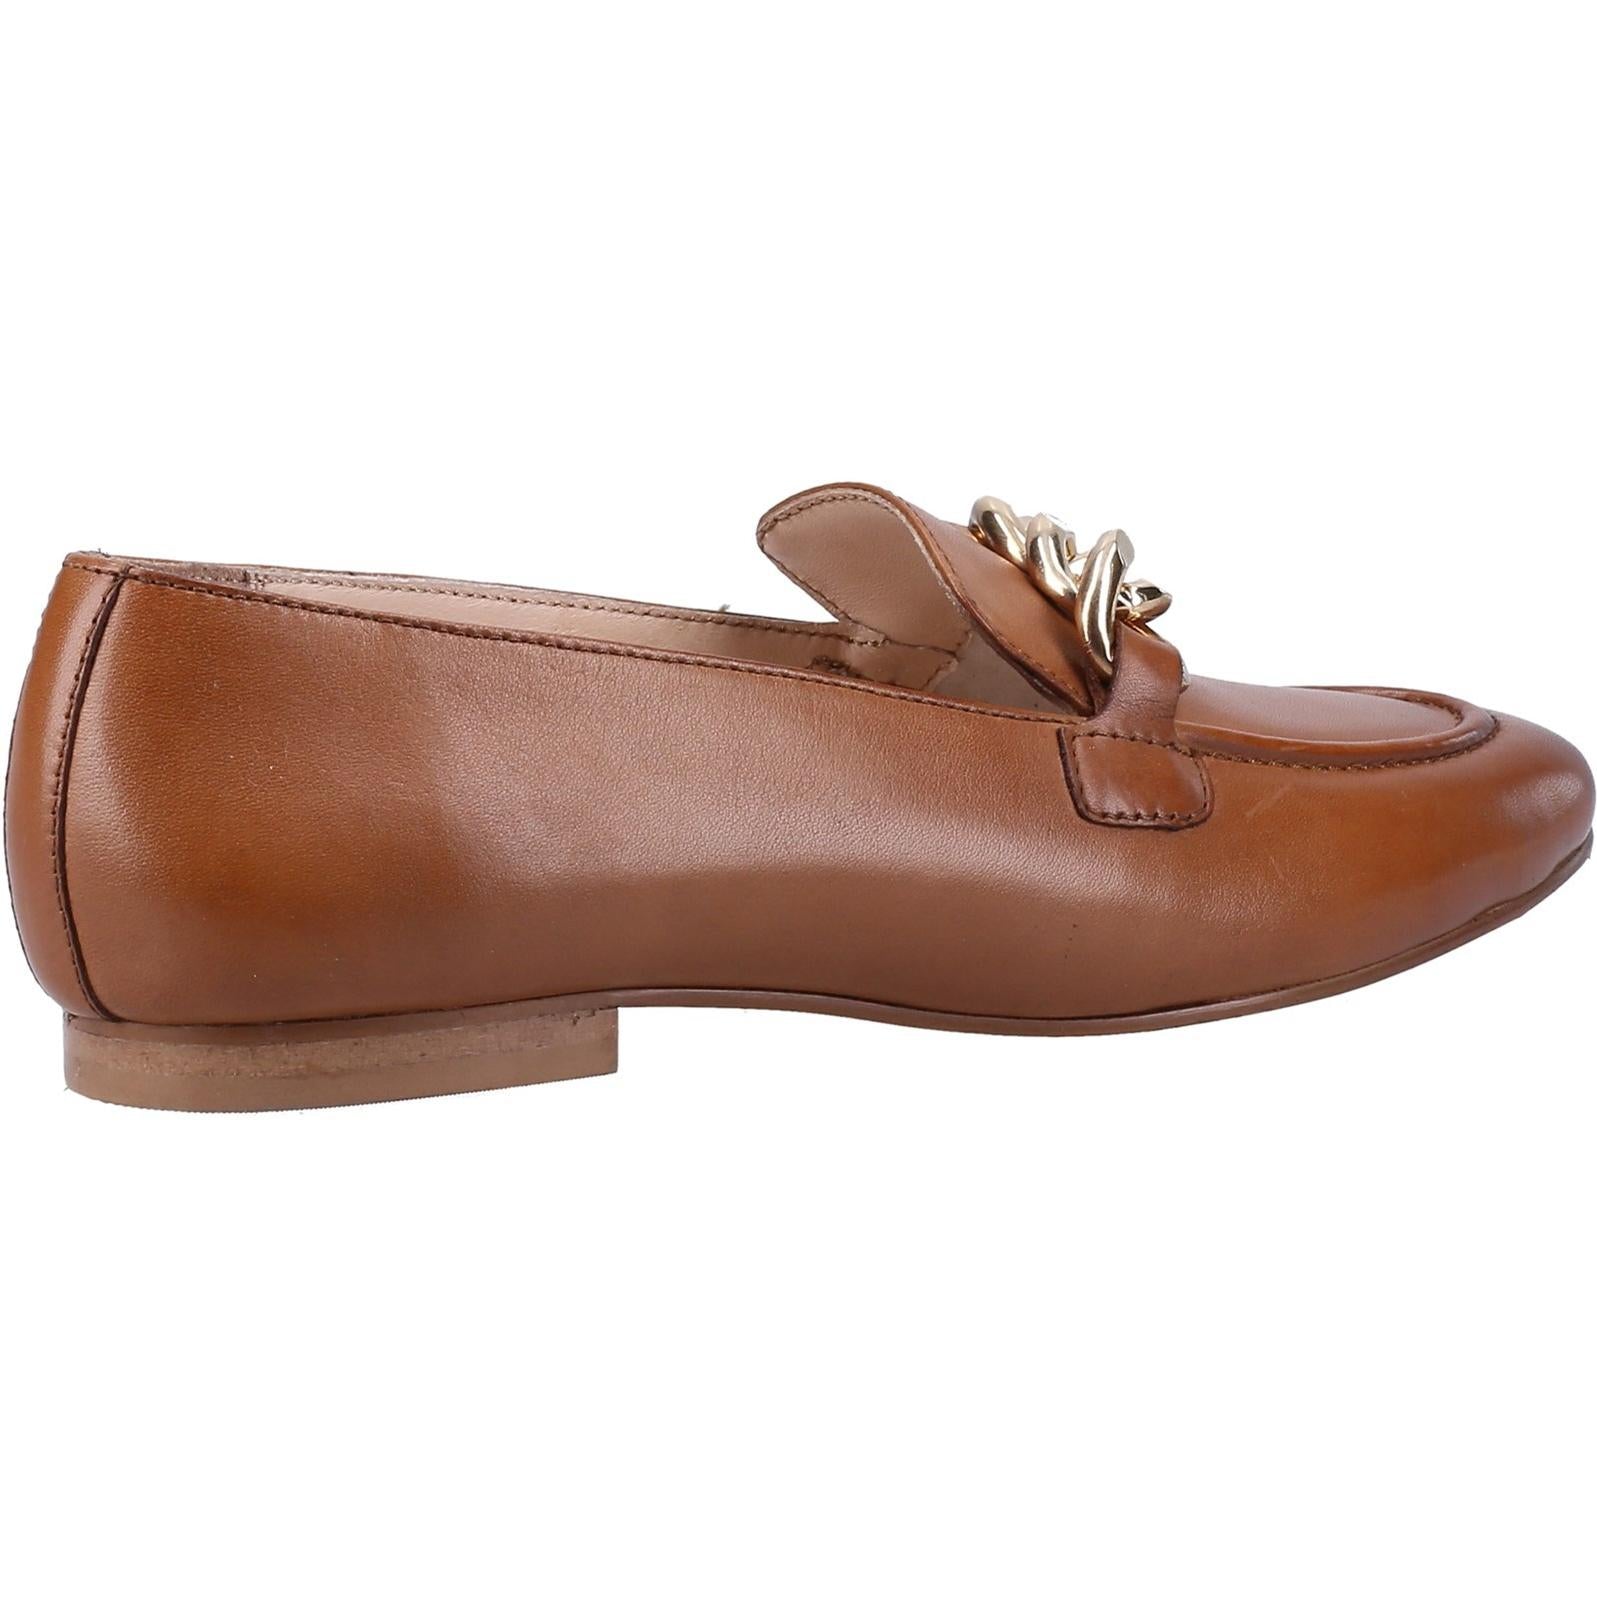 Hush Puppies Harper Chain Loafer Shoes